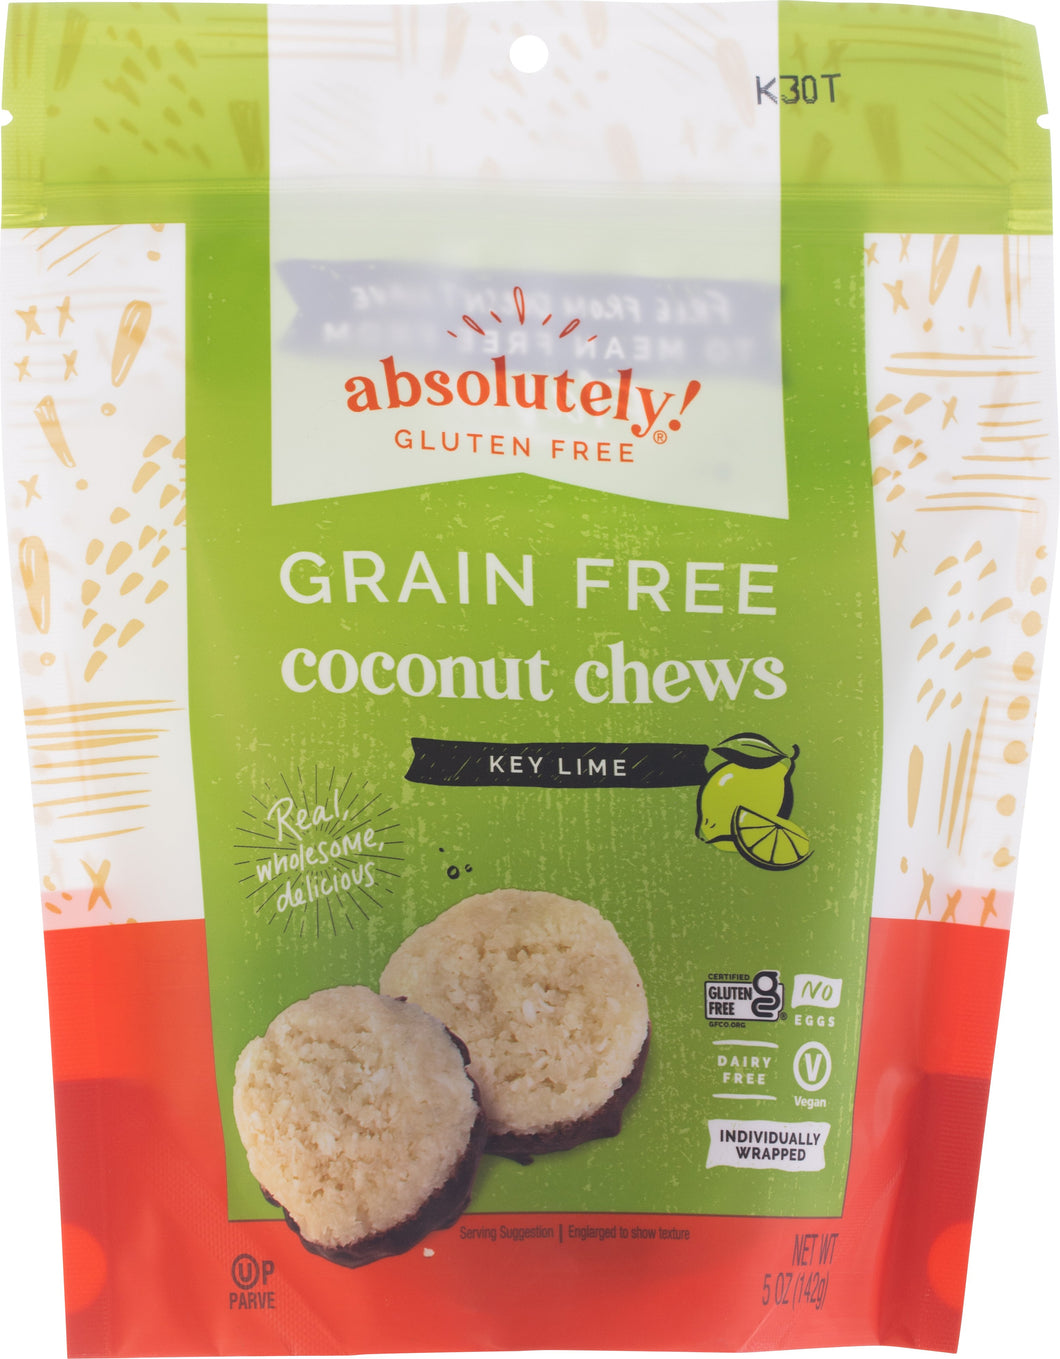 Absolutely Gluten Free Coconut Chews, Key Lime, 5 oz